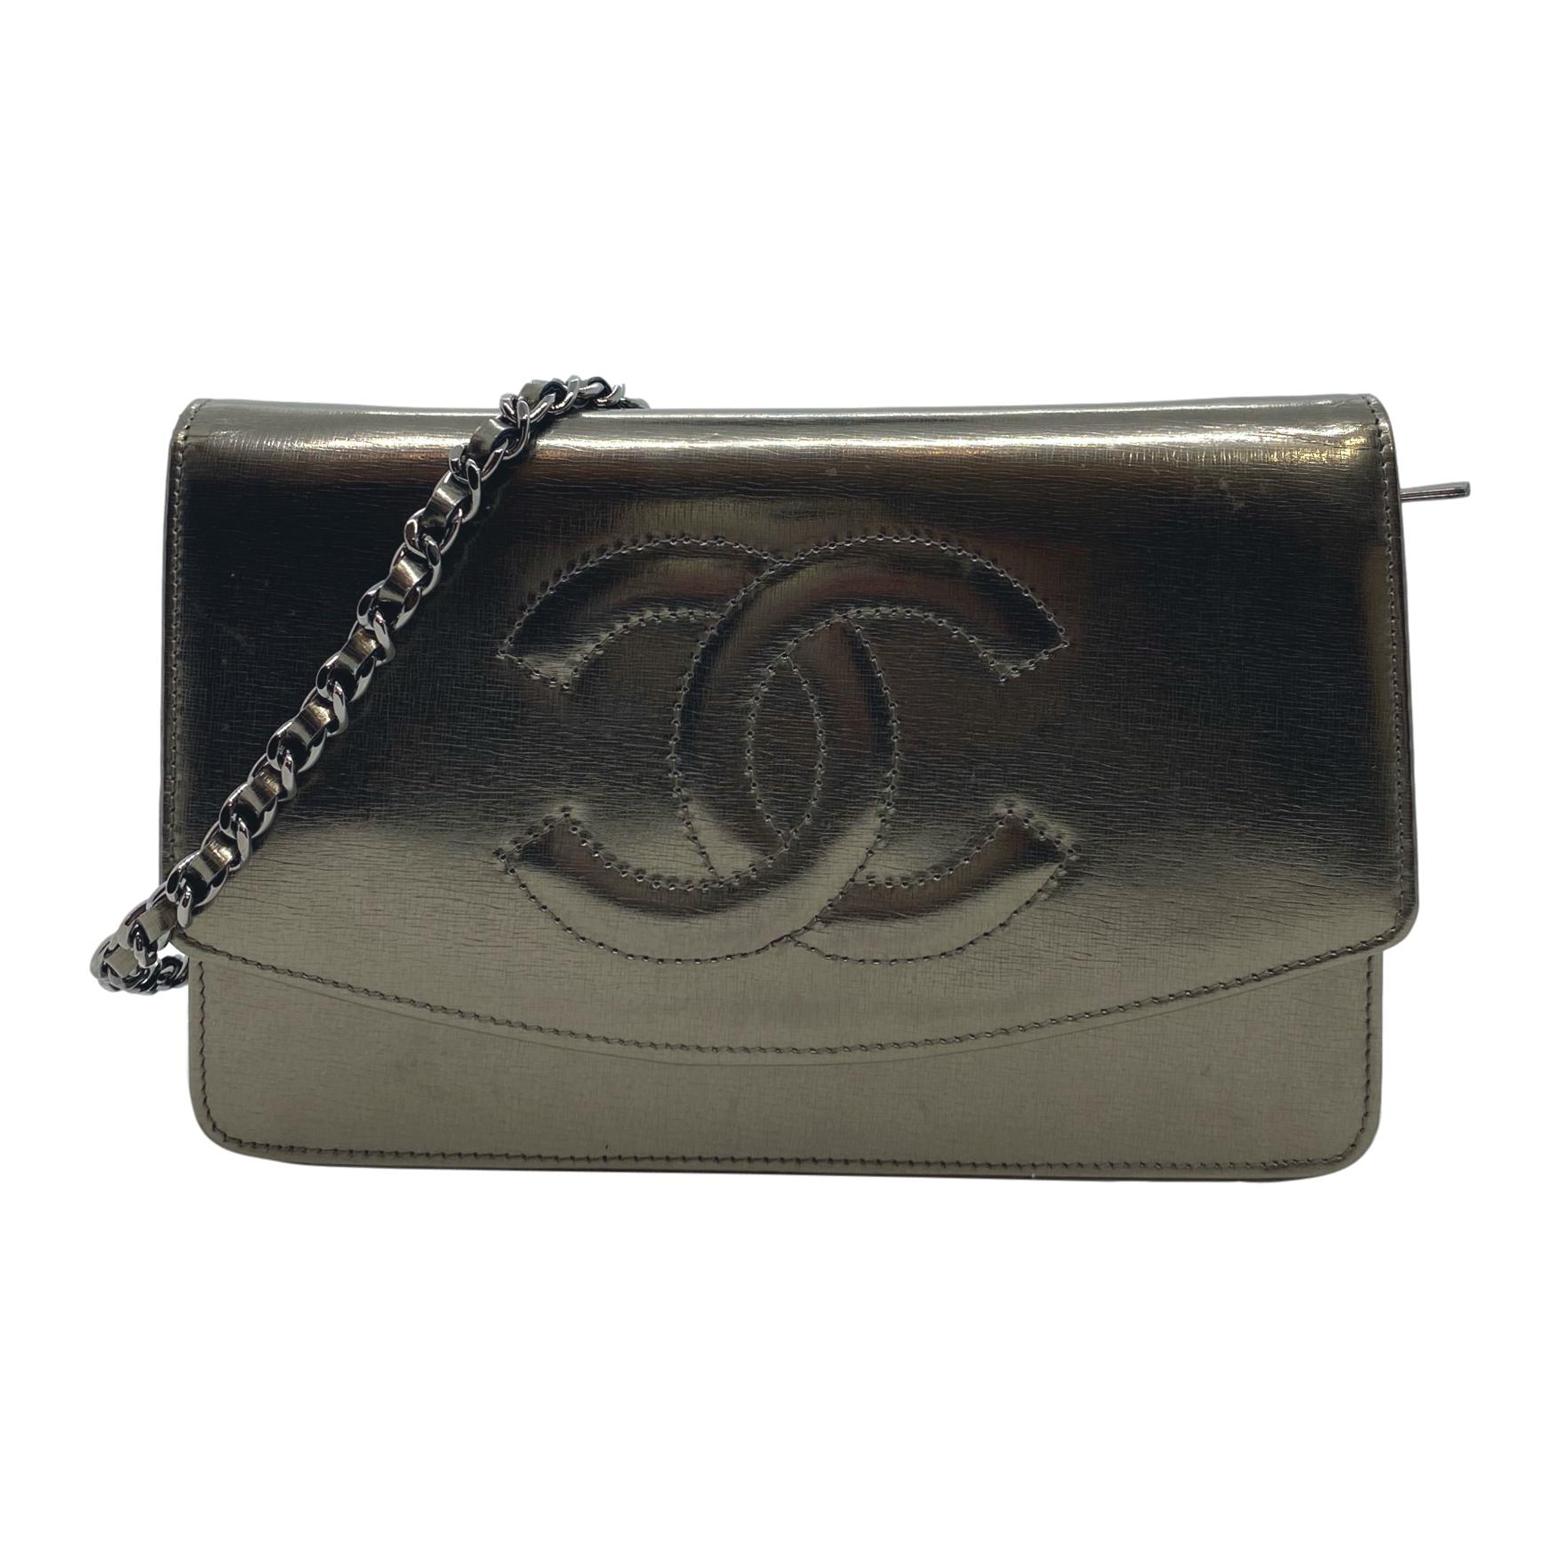 Chanel Timeless Metallic Leather Wallet on Chain Shoulder Clutch Bag, 2008.